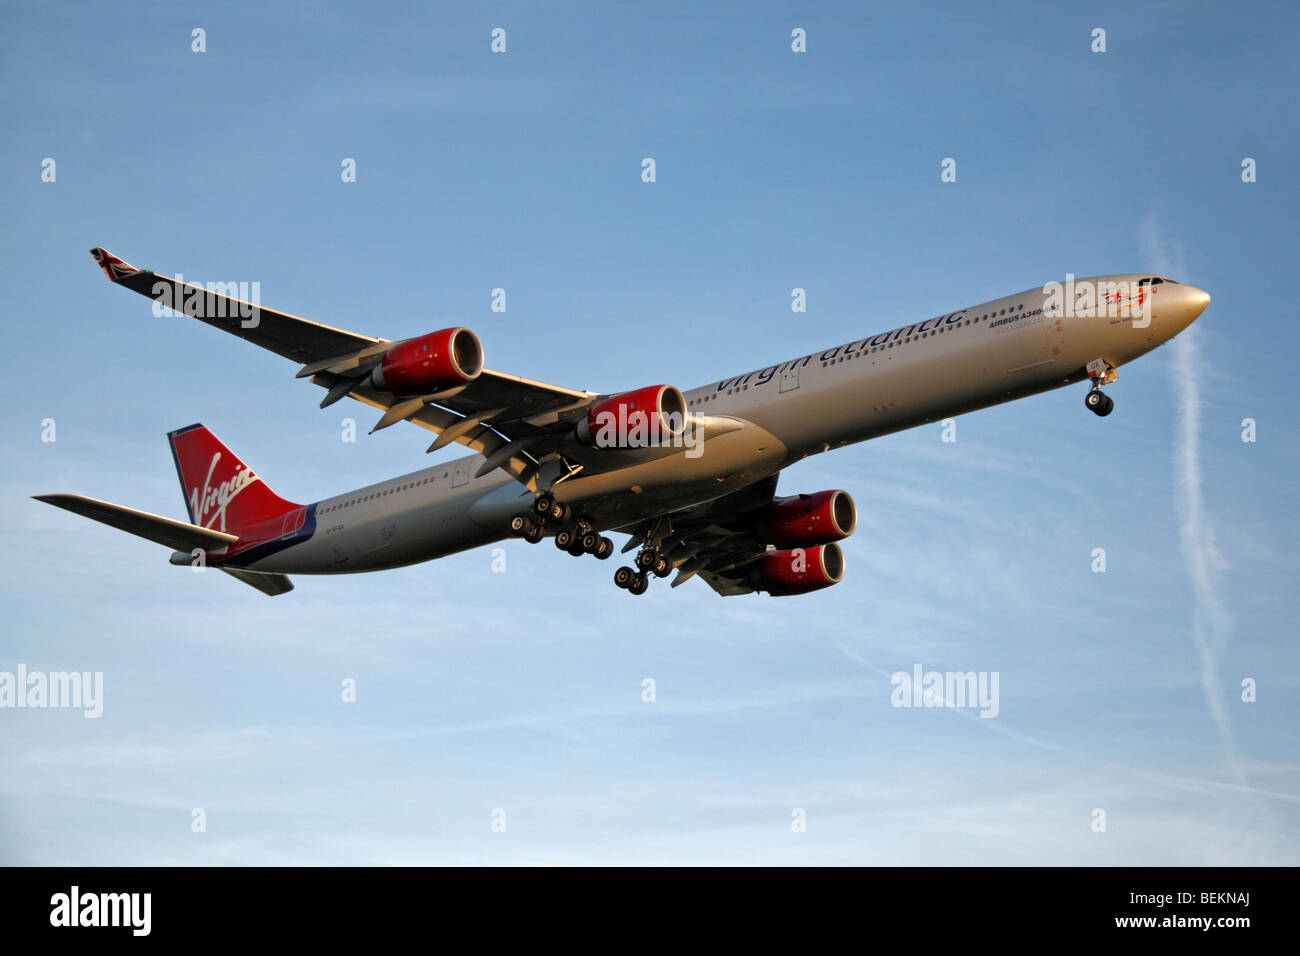 A Virgin Atlantic Airbus A340-600 coming in to land at London Heathrow, UK.  August 2009. (G-VFOX) Stock Photo